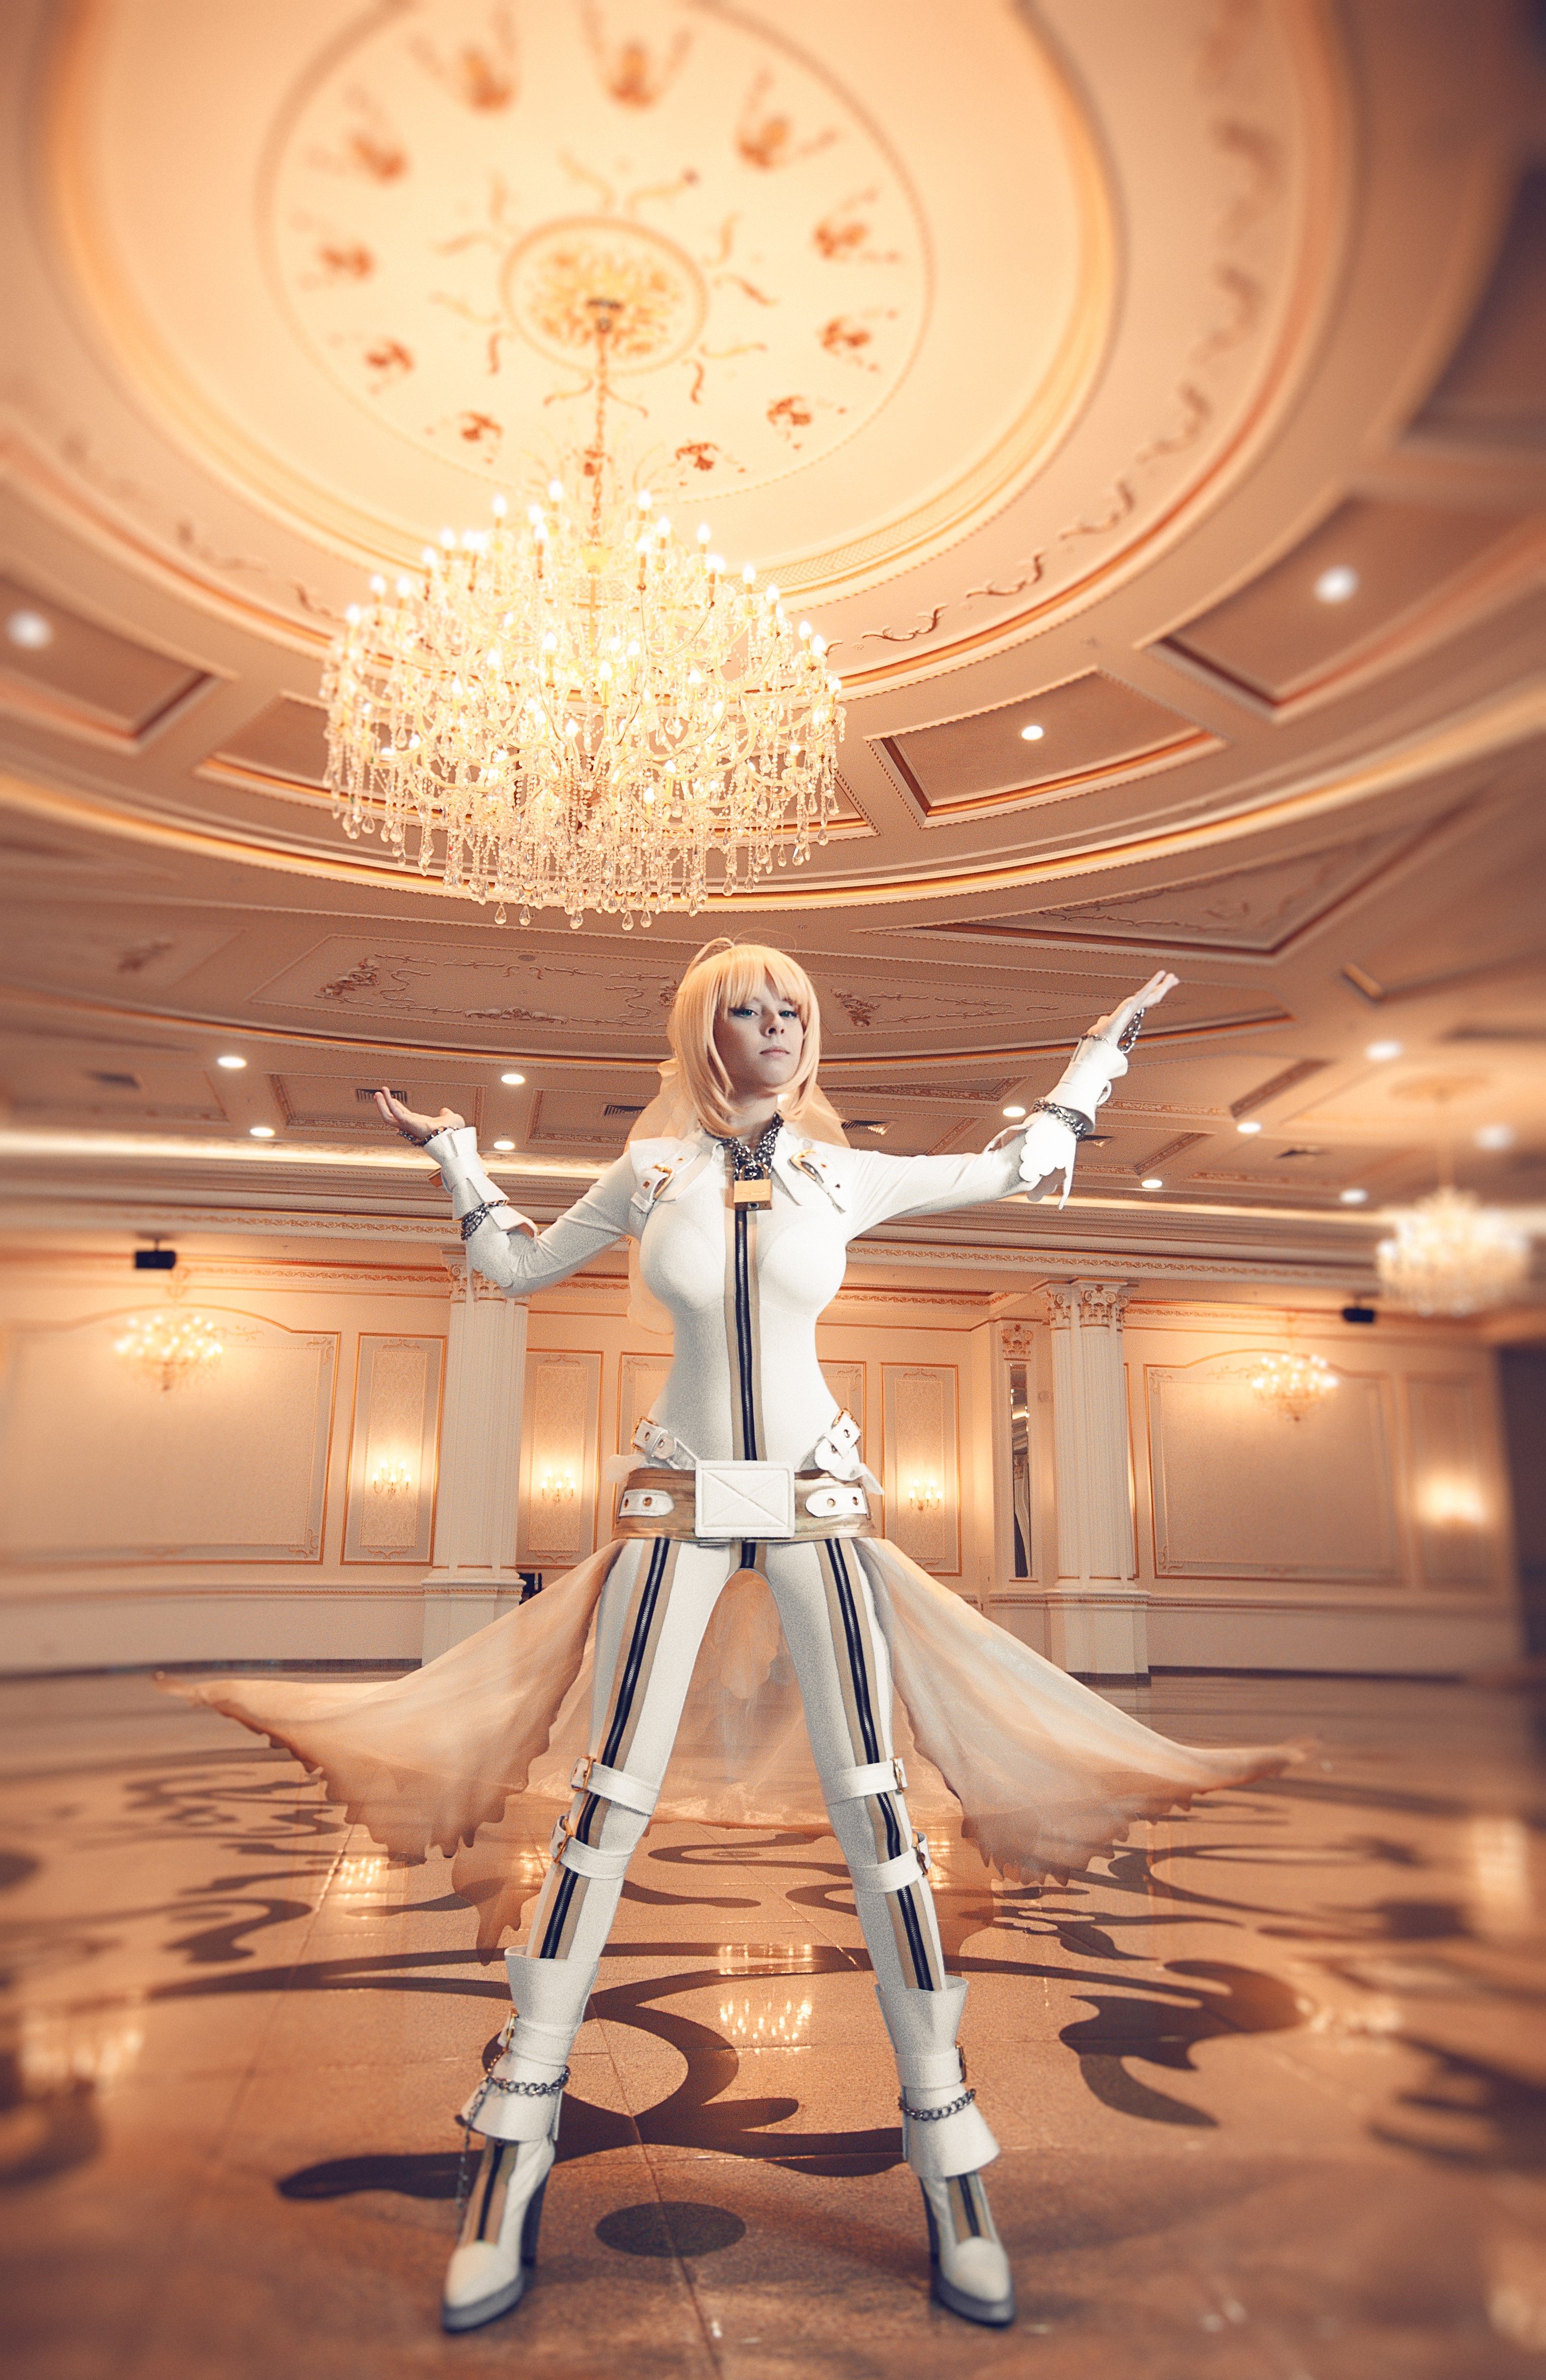 Suits Boots Cosplay Saber Bride Long Hair Blonde Blue Eyes Leather Boots Leather Clothing Ballroom H 3148x4847